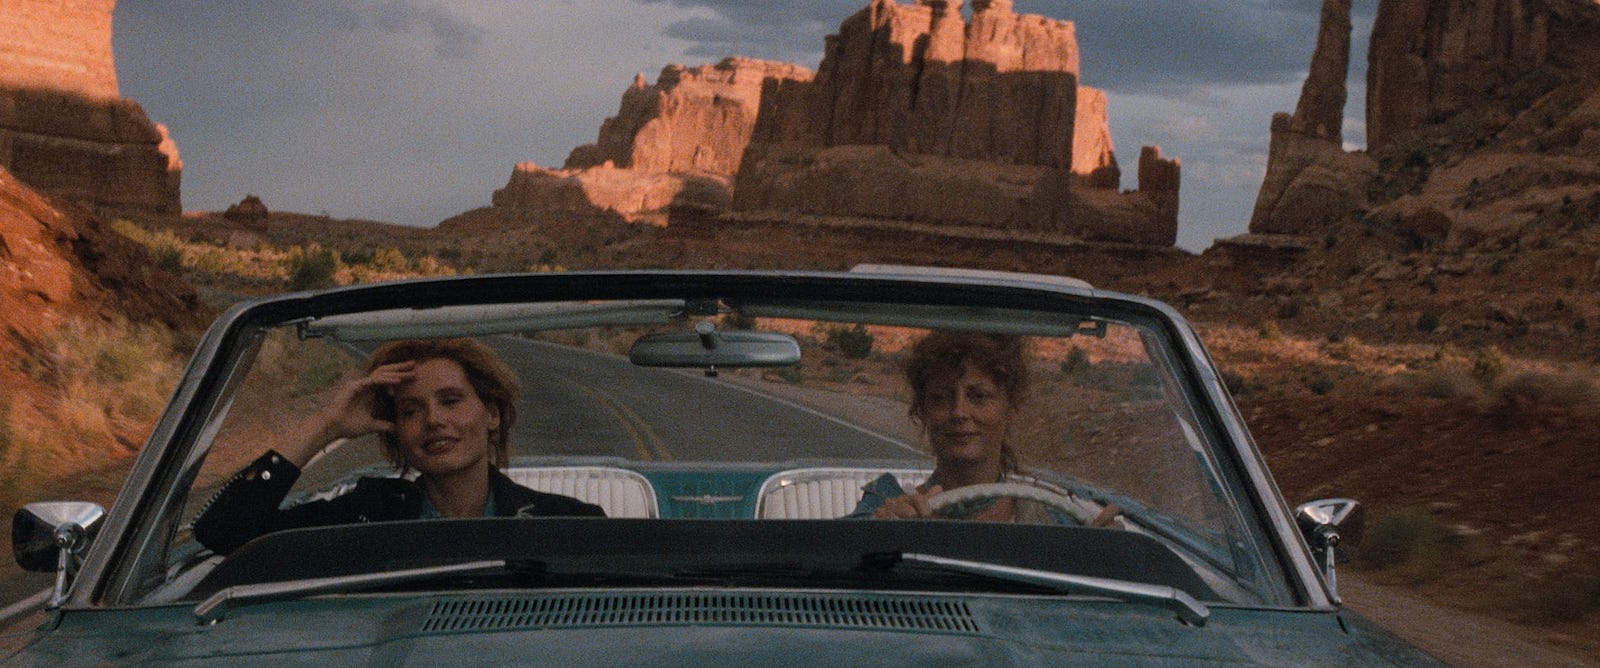 Thelma & Louise Review :: Criterion Forum